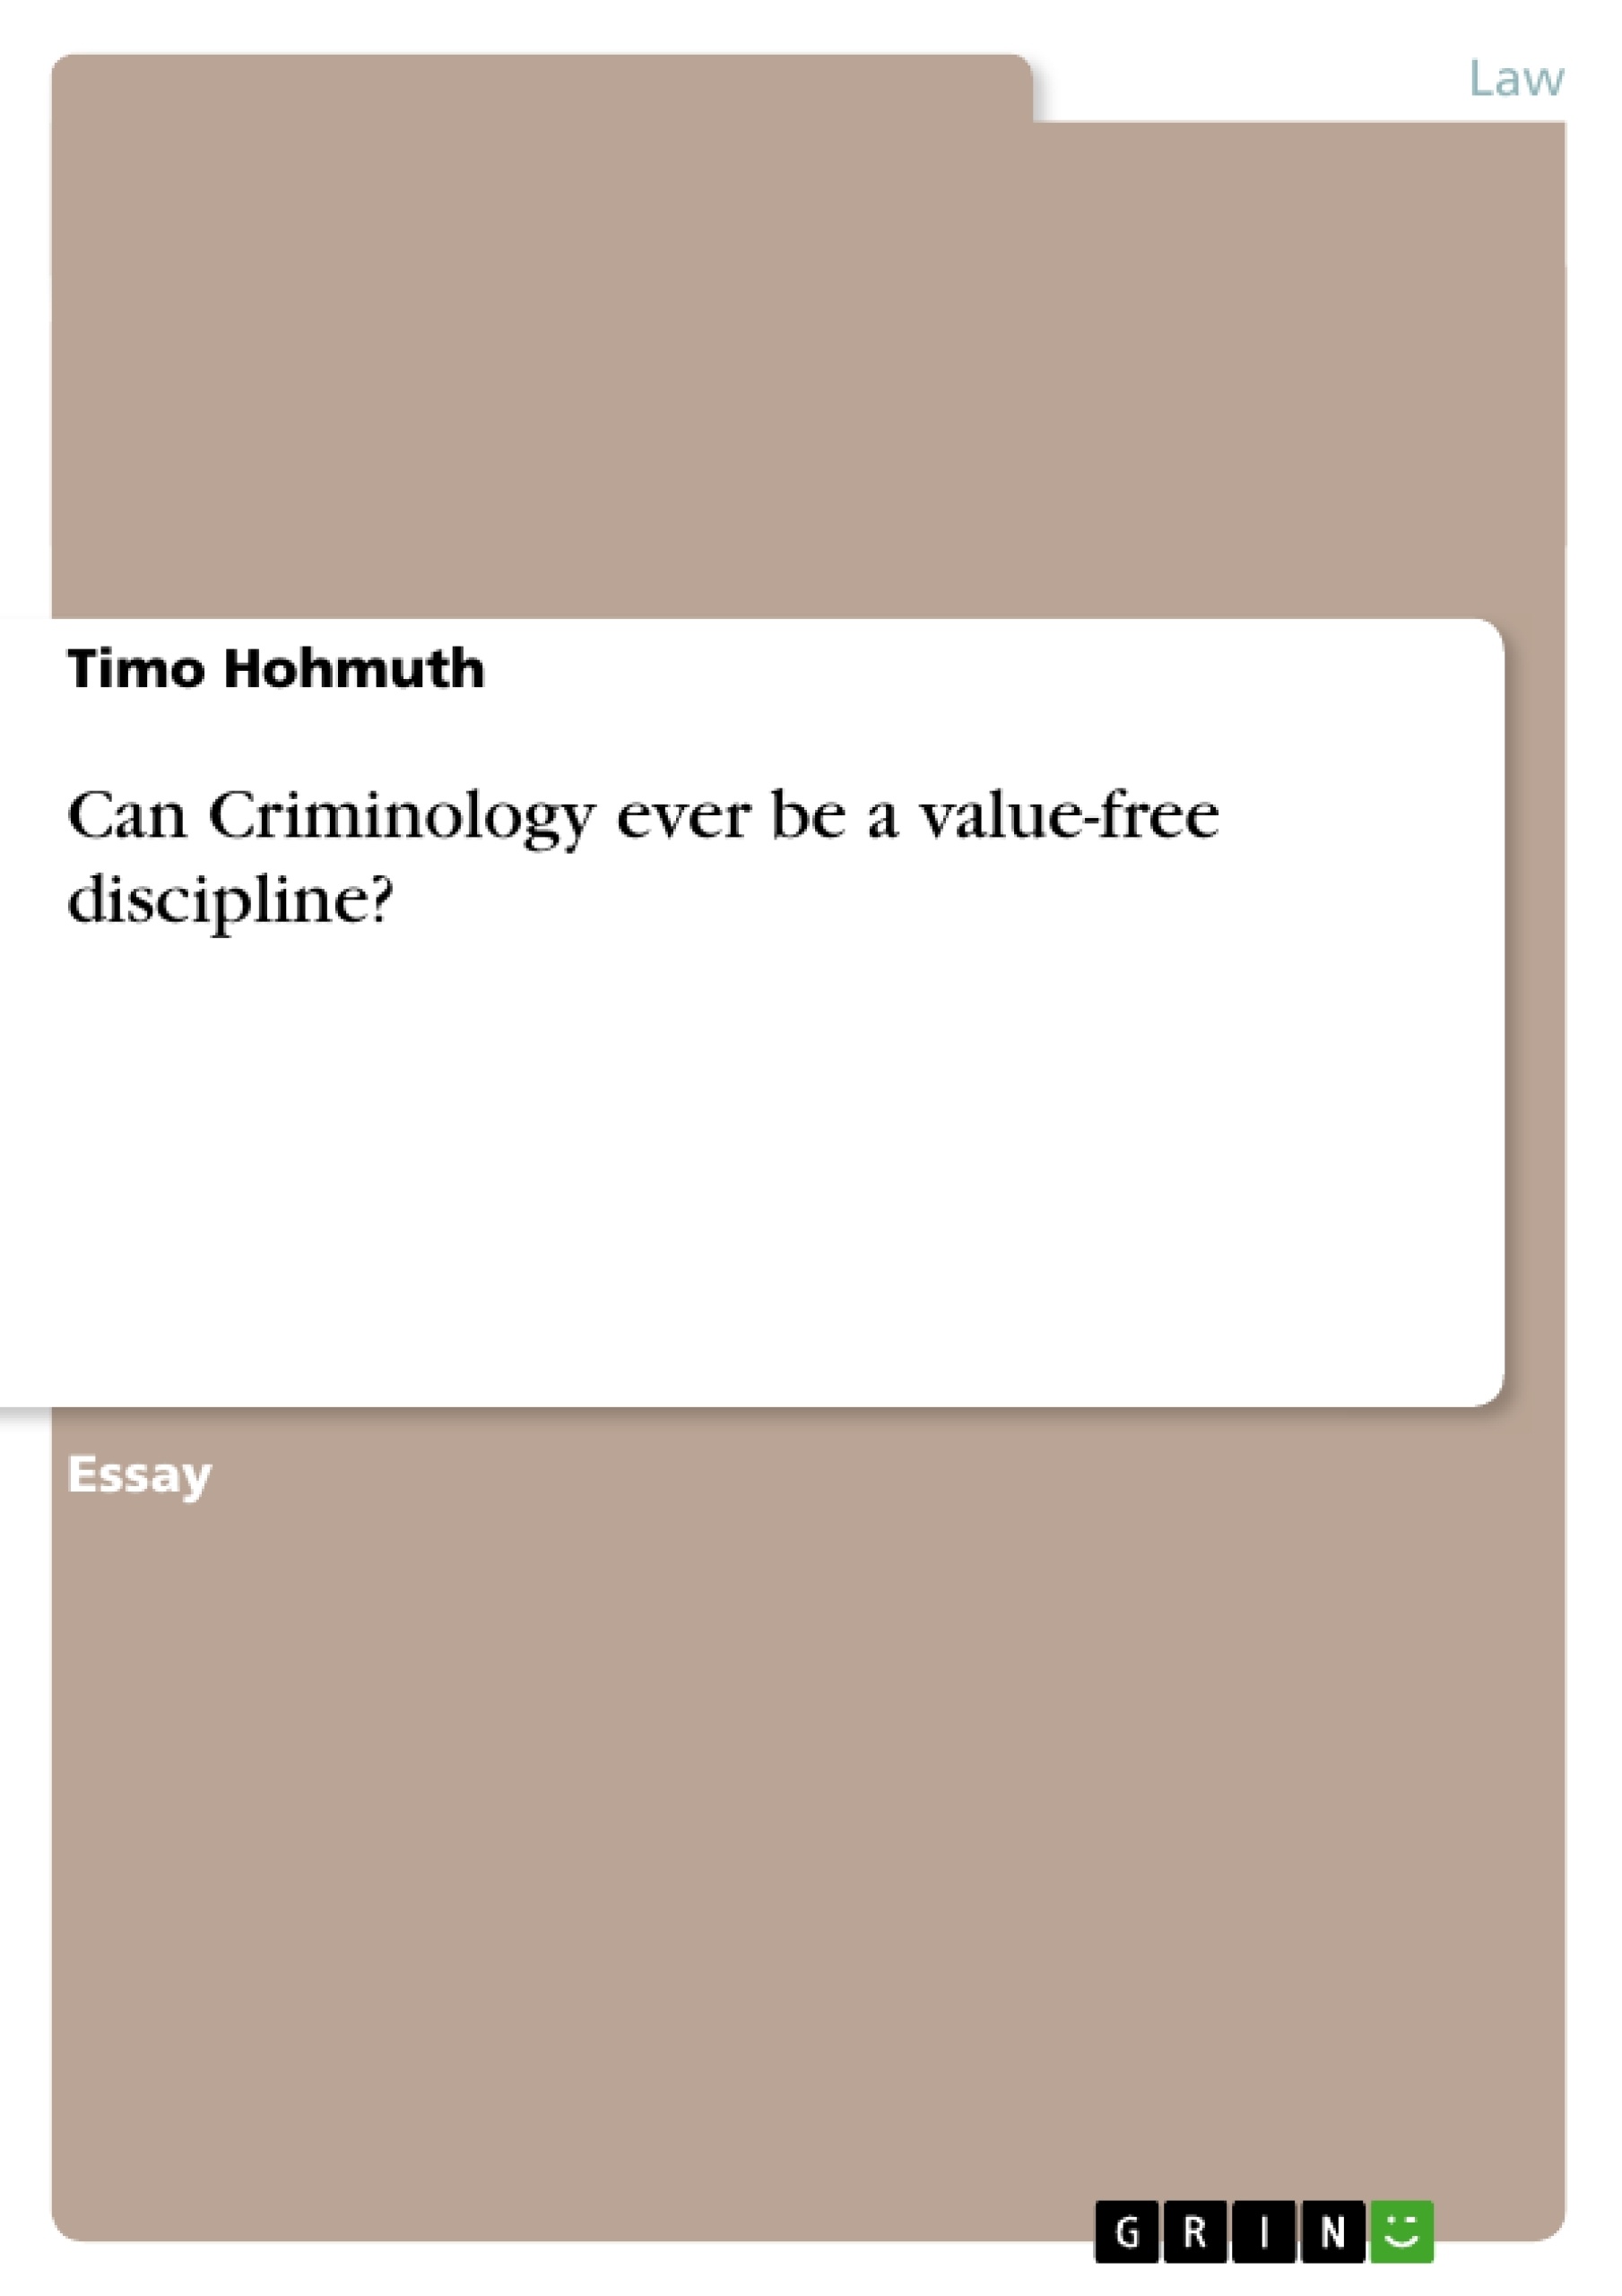 Título: Can Criminology ever be a value-free discipline?